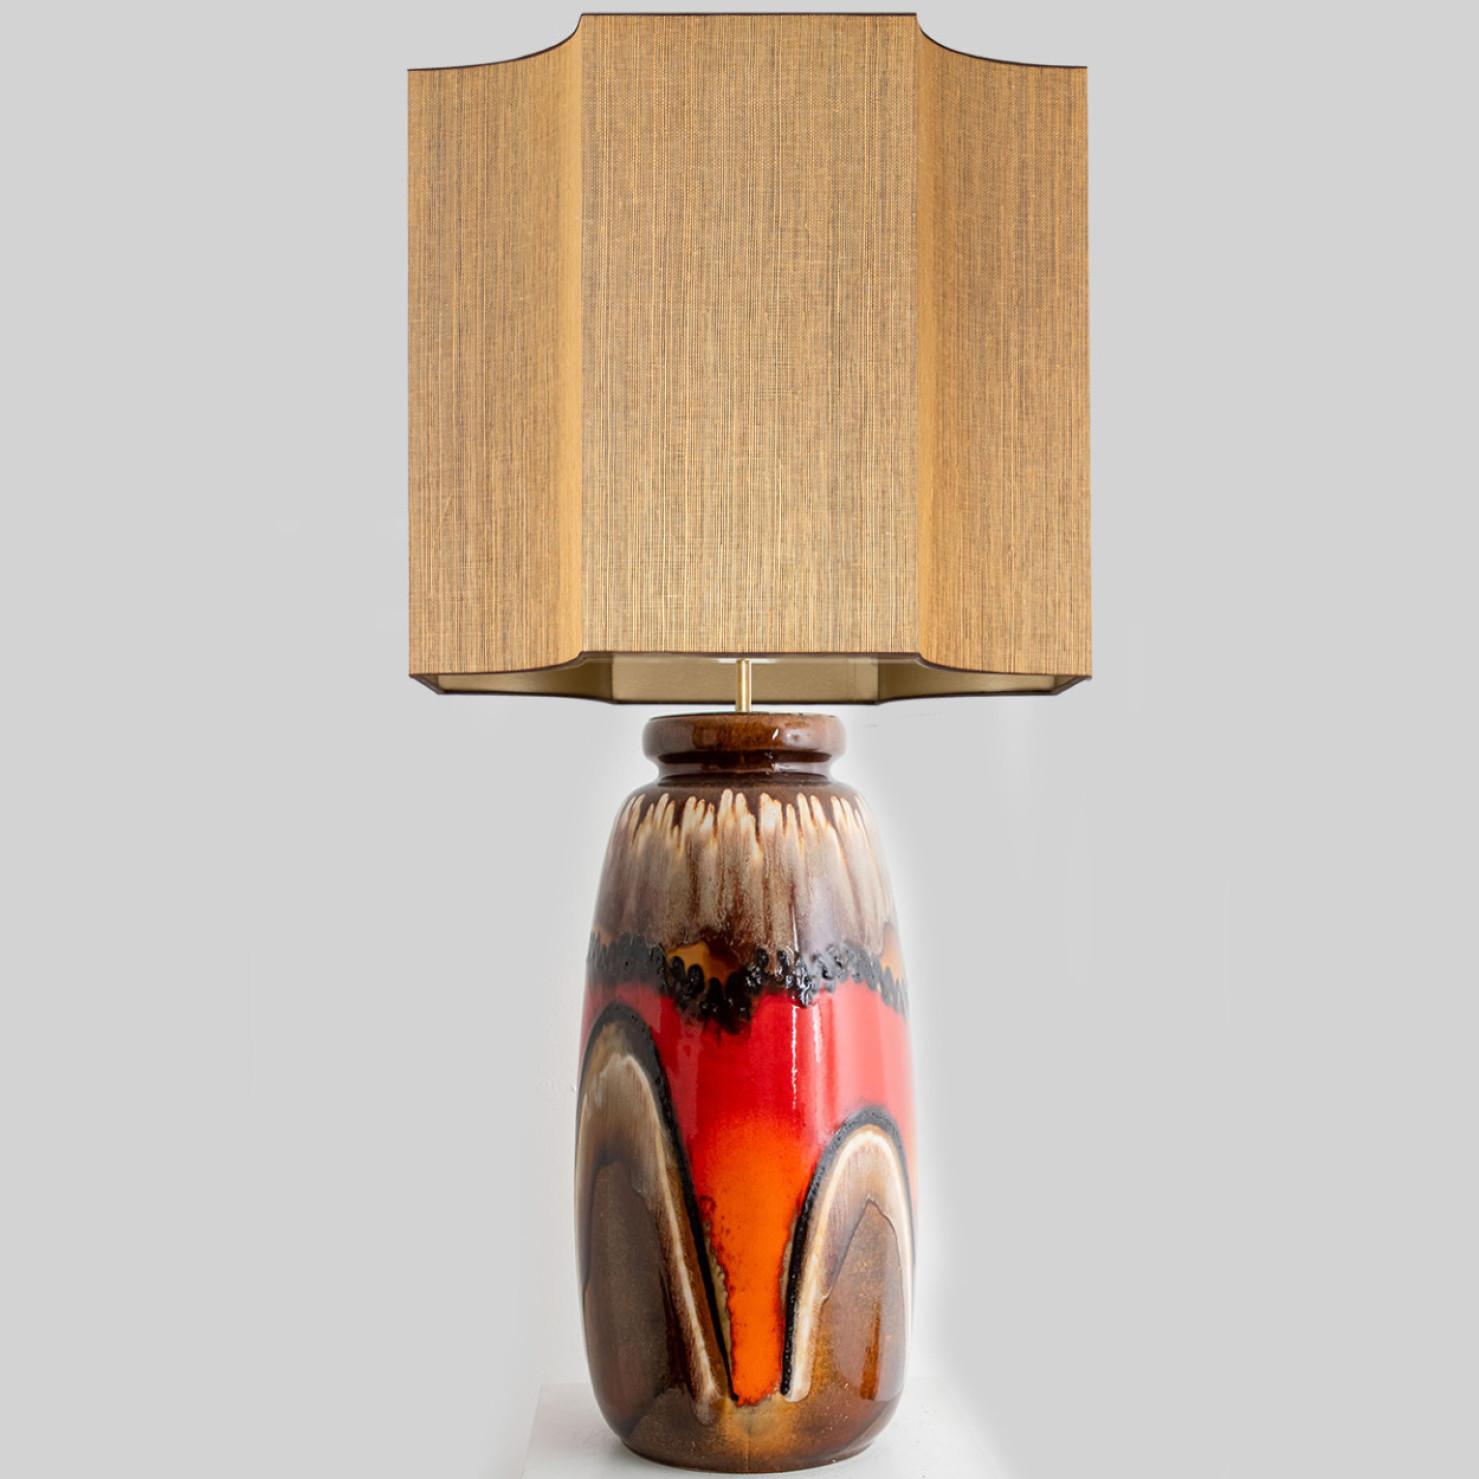 'Fat Lava' style ceramic table lamp with brown with red and orange glaze. Manufactured in West-Germany in the 1970's.
The style of the glaze is in between 'Fat Lava' and 'Drip glaze'. Which means the glaze is thick on some parts, and one glaze runs